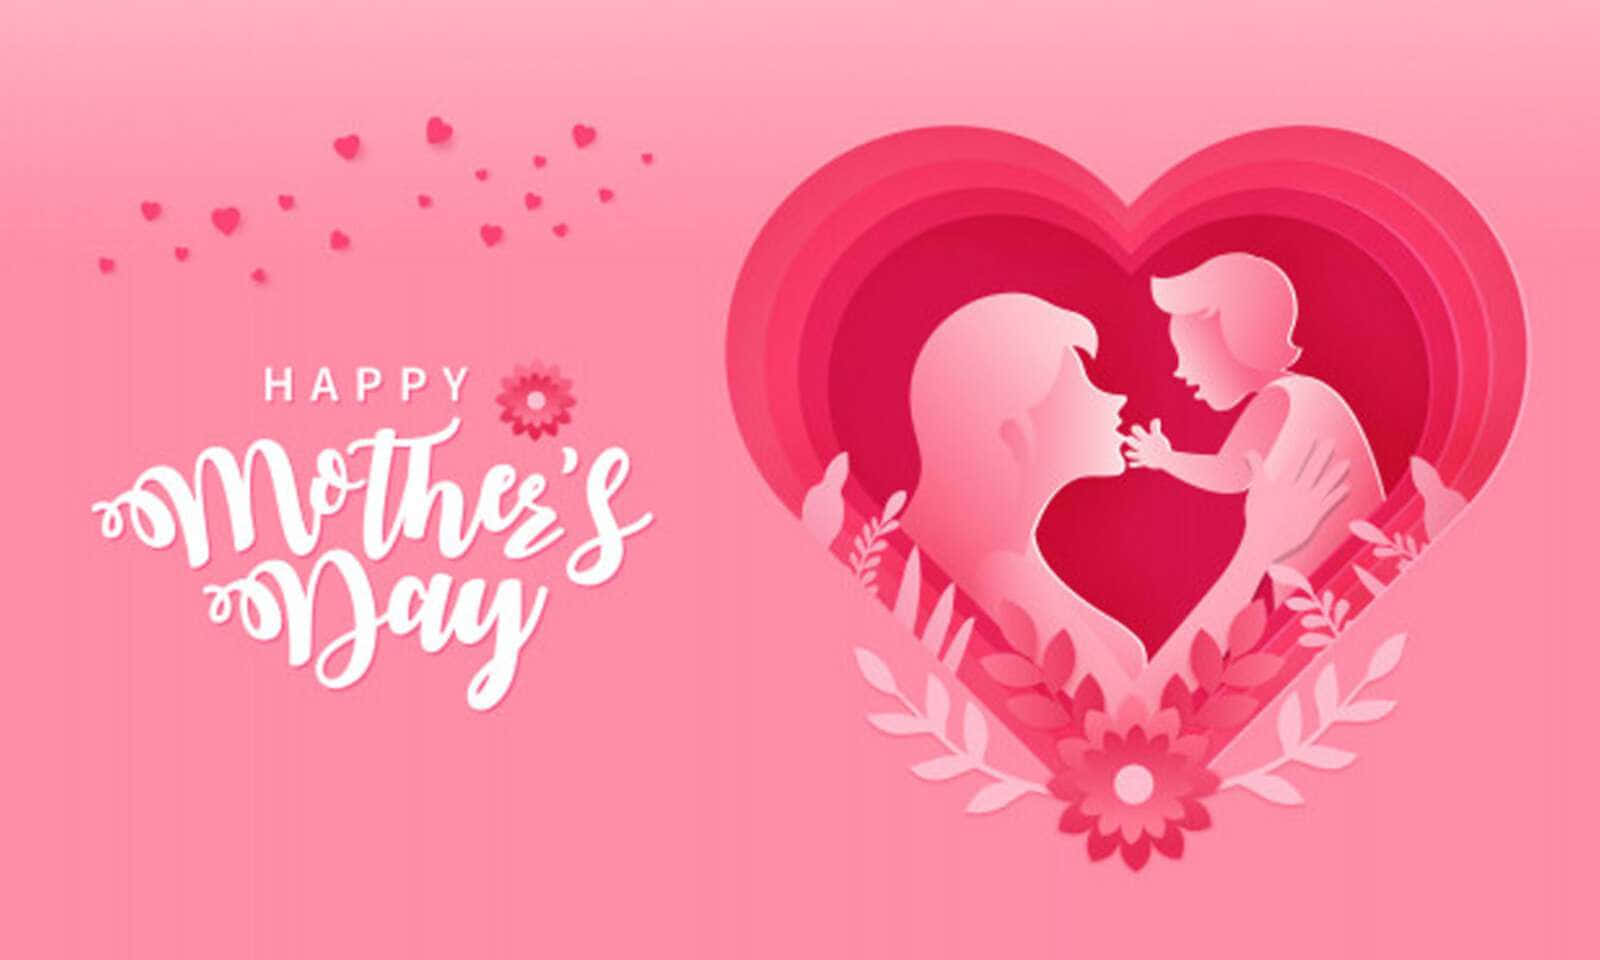 Happy Mother's Day Images, Wallpapers, And Quotes